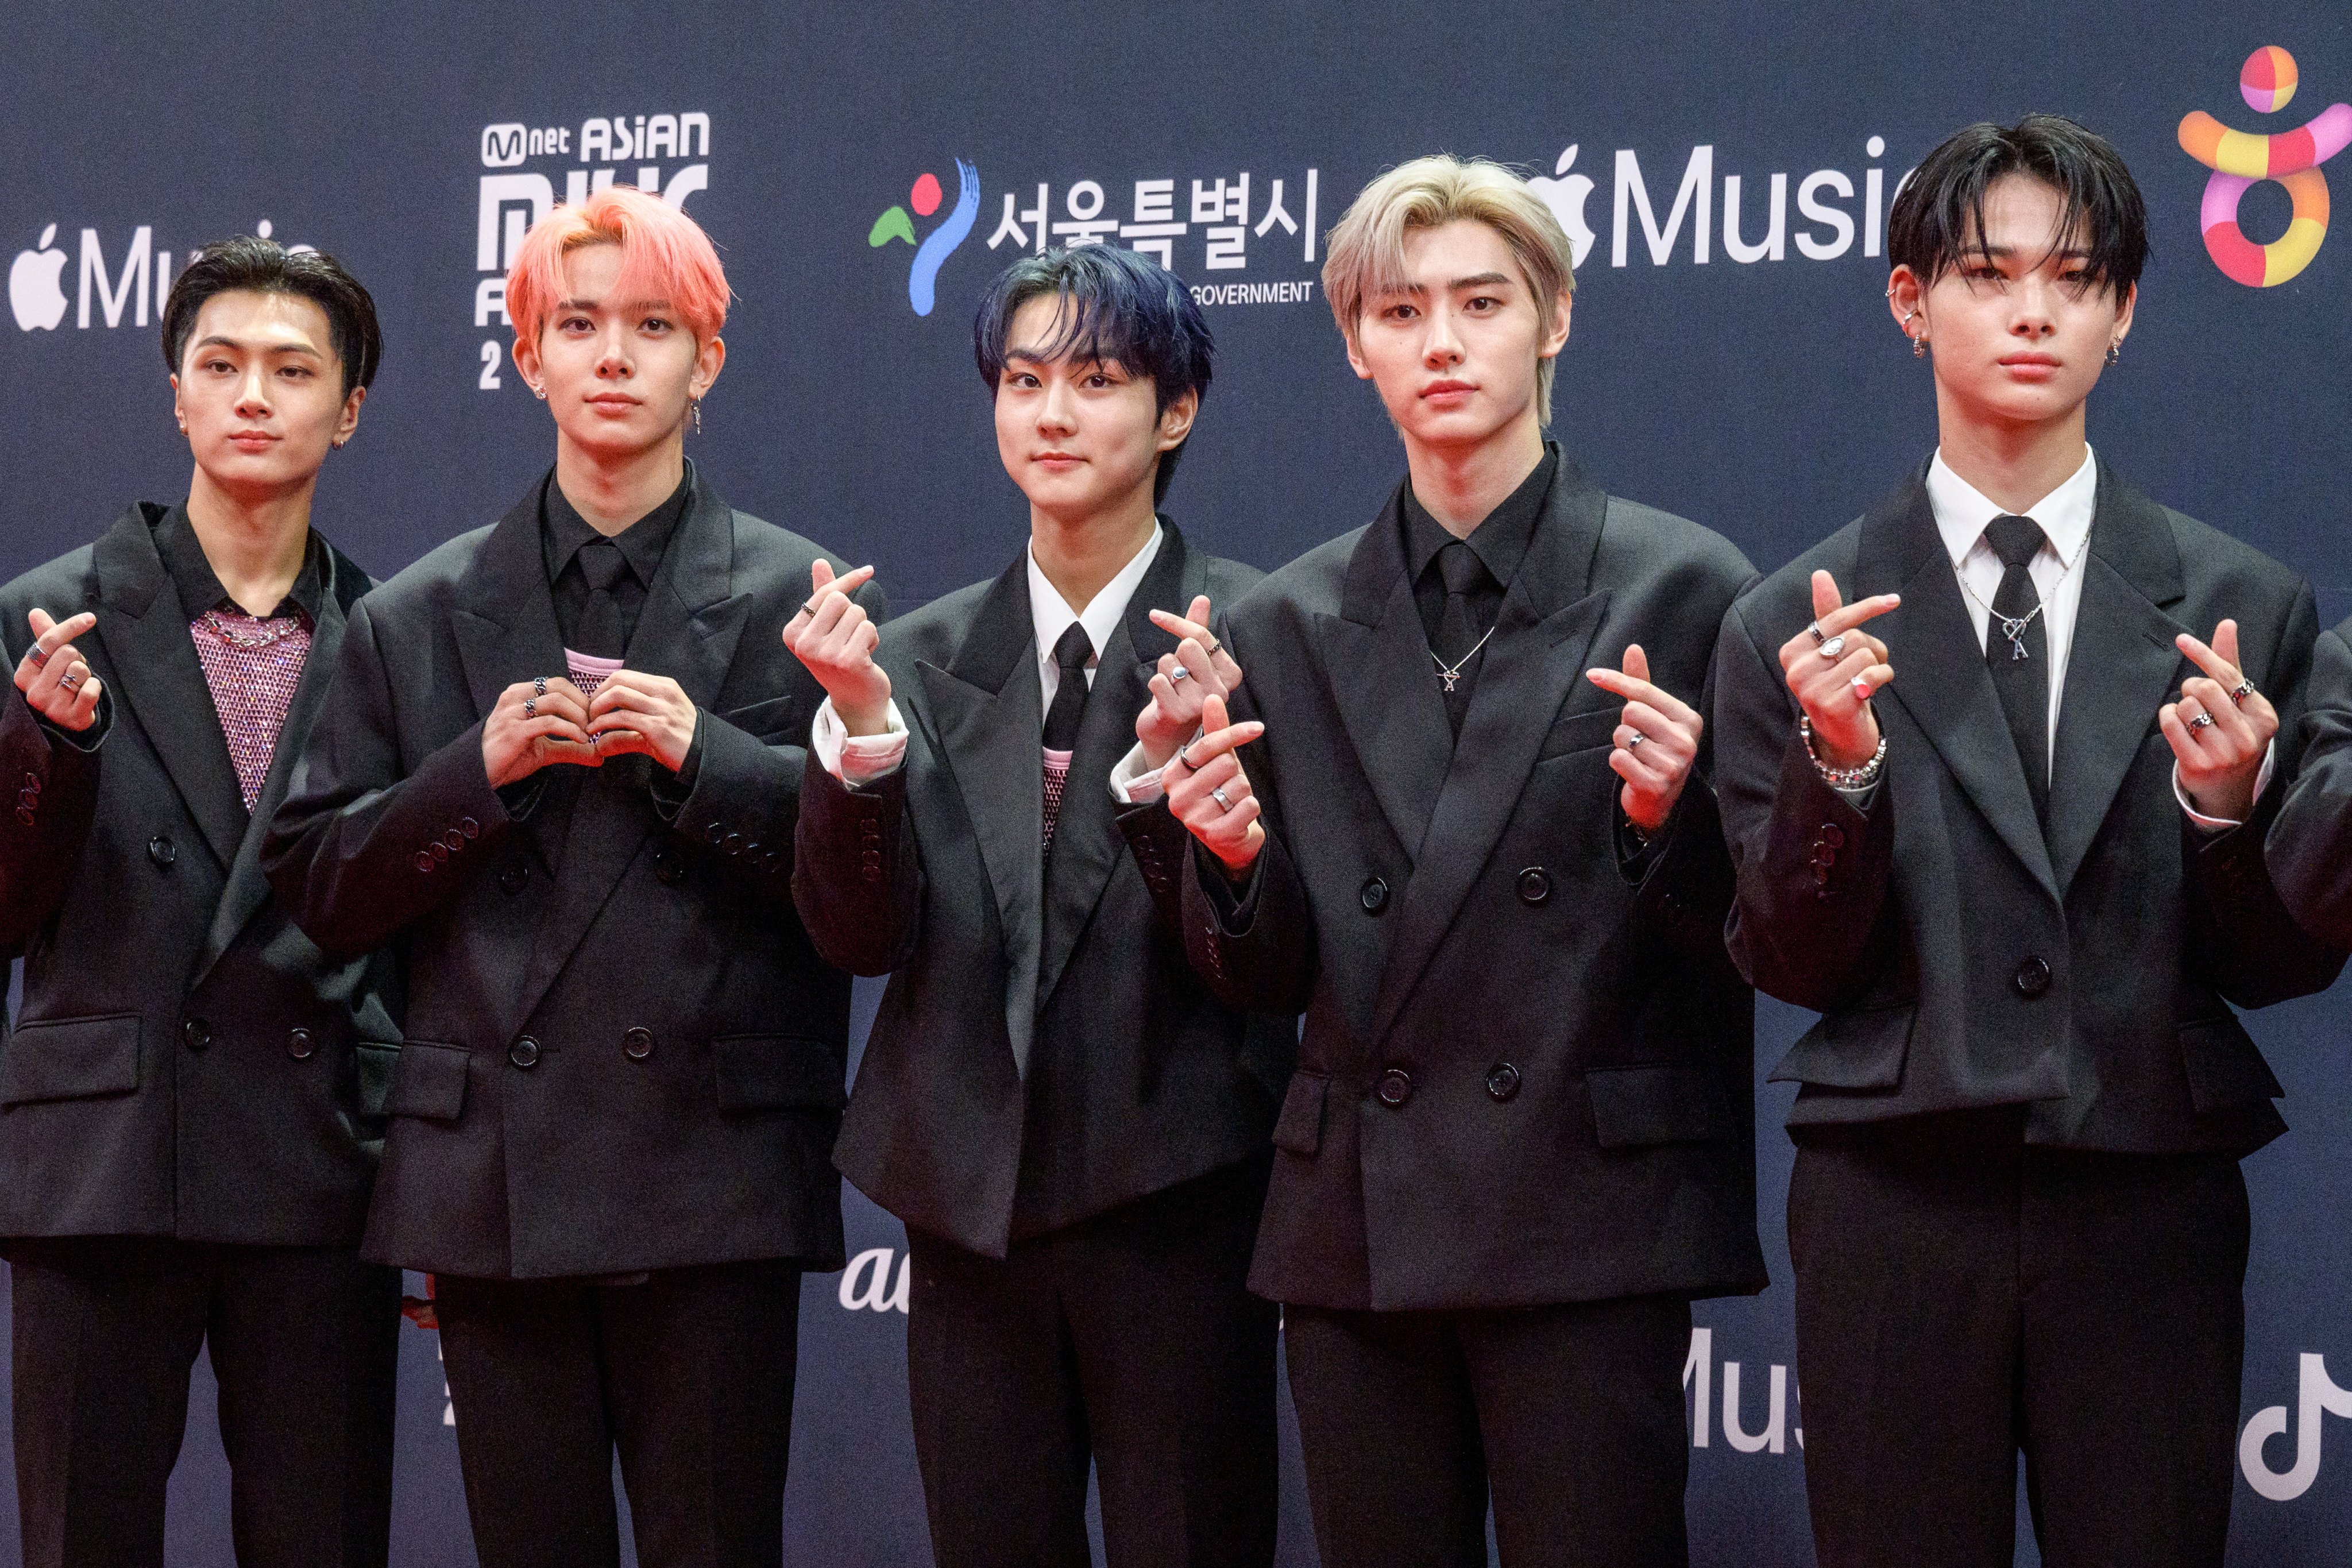 K-pop boy group Enhypen at the Mnet Asian Music Awards (MAMAs) in Seoul, South Korea, on December 11, 2021. Photo: AFP